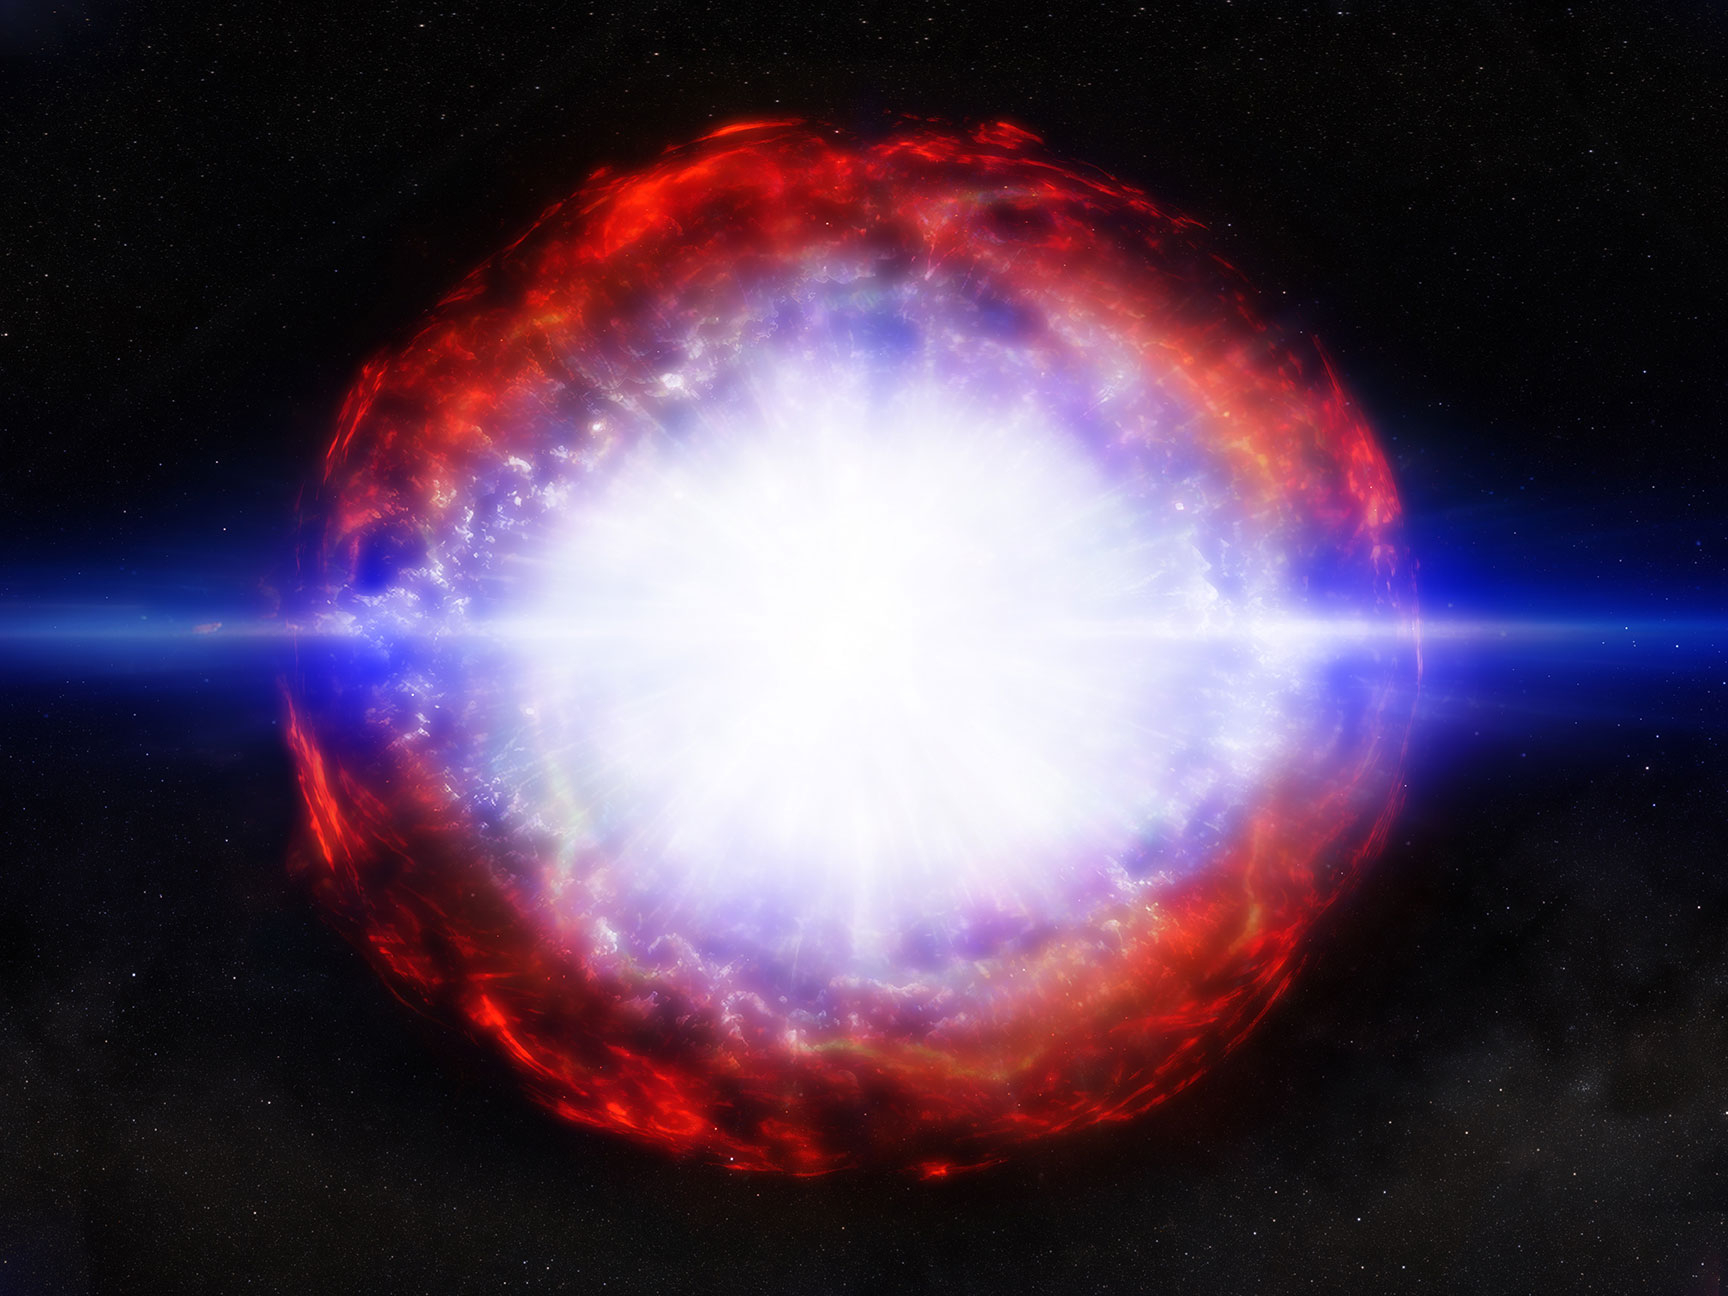 a large bright white fireball star emanates a sphere of fiery expulsion